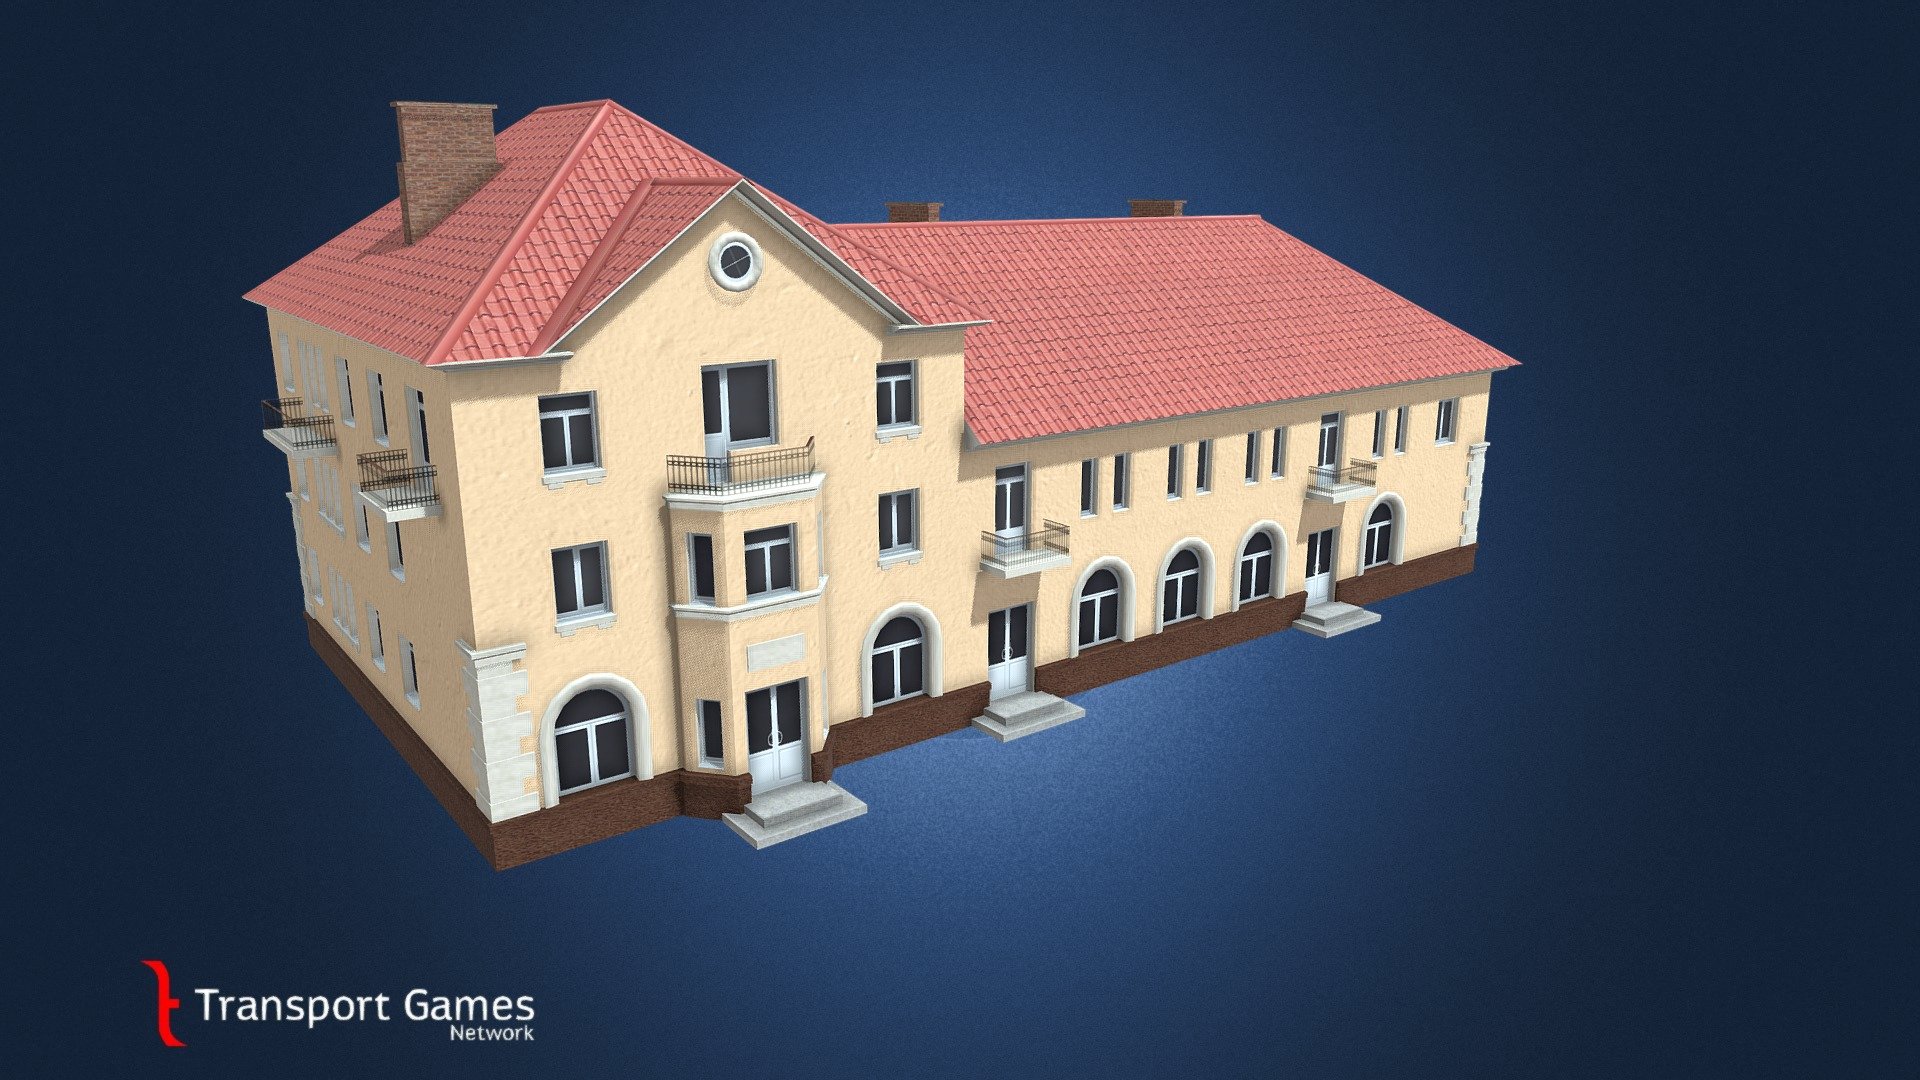 Asset for Citites Skylines.
Series 1-228-10. Version 3A with stucco walls. Left orientation
Typical soviet house in middle 20th century.
 - House with shops prj 1-228-10/3AL Stucco walls - 3D model by targa (@targettius) 3d model